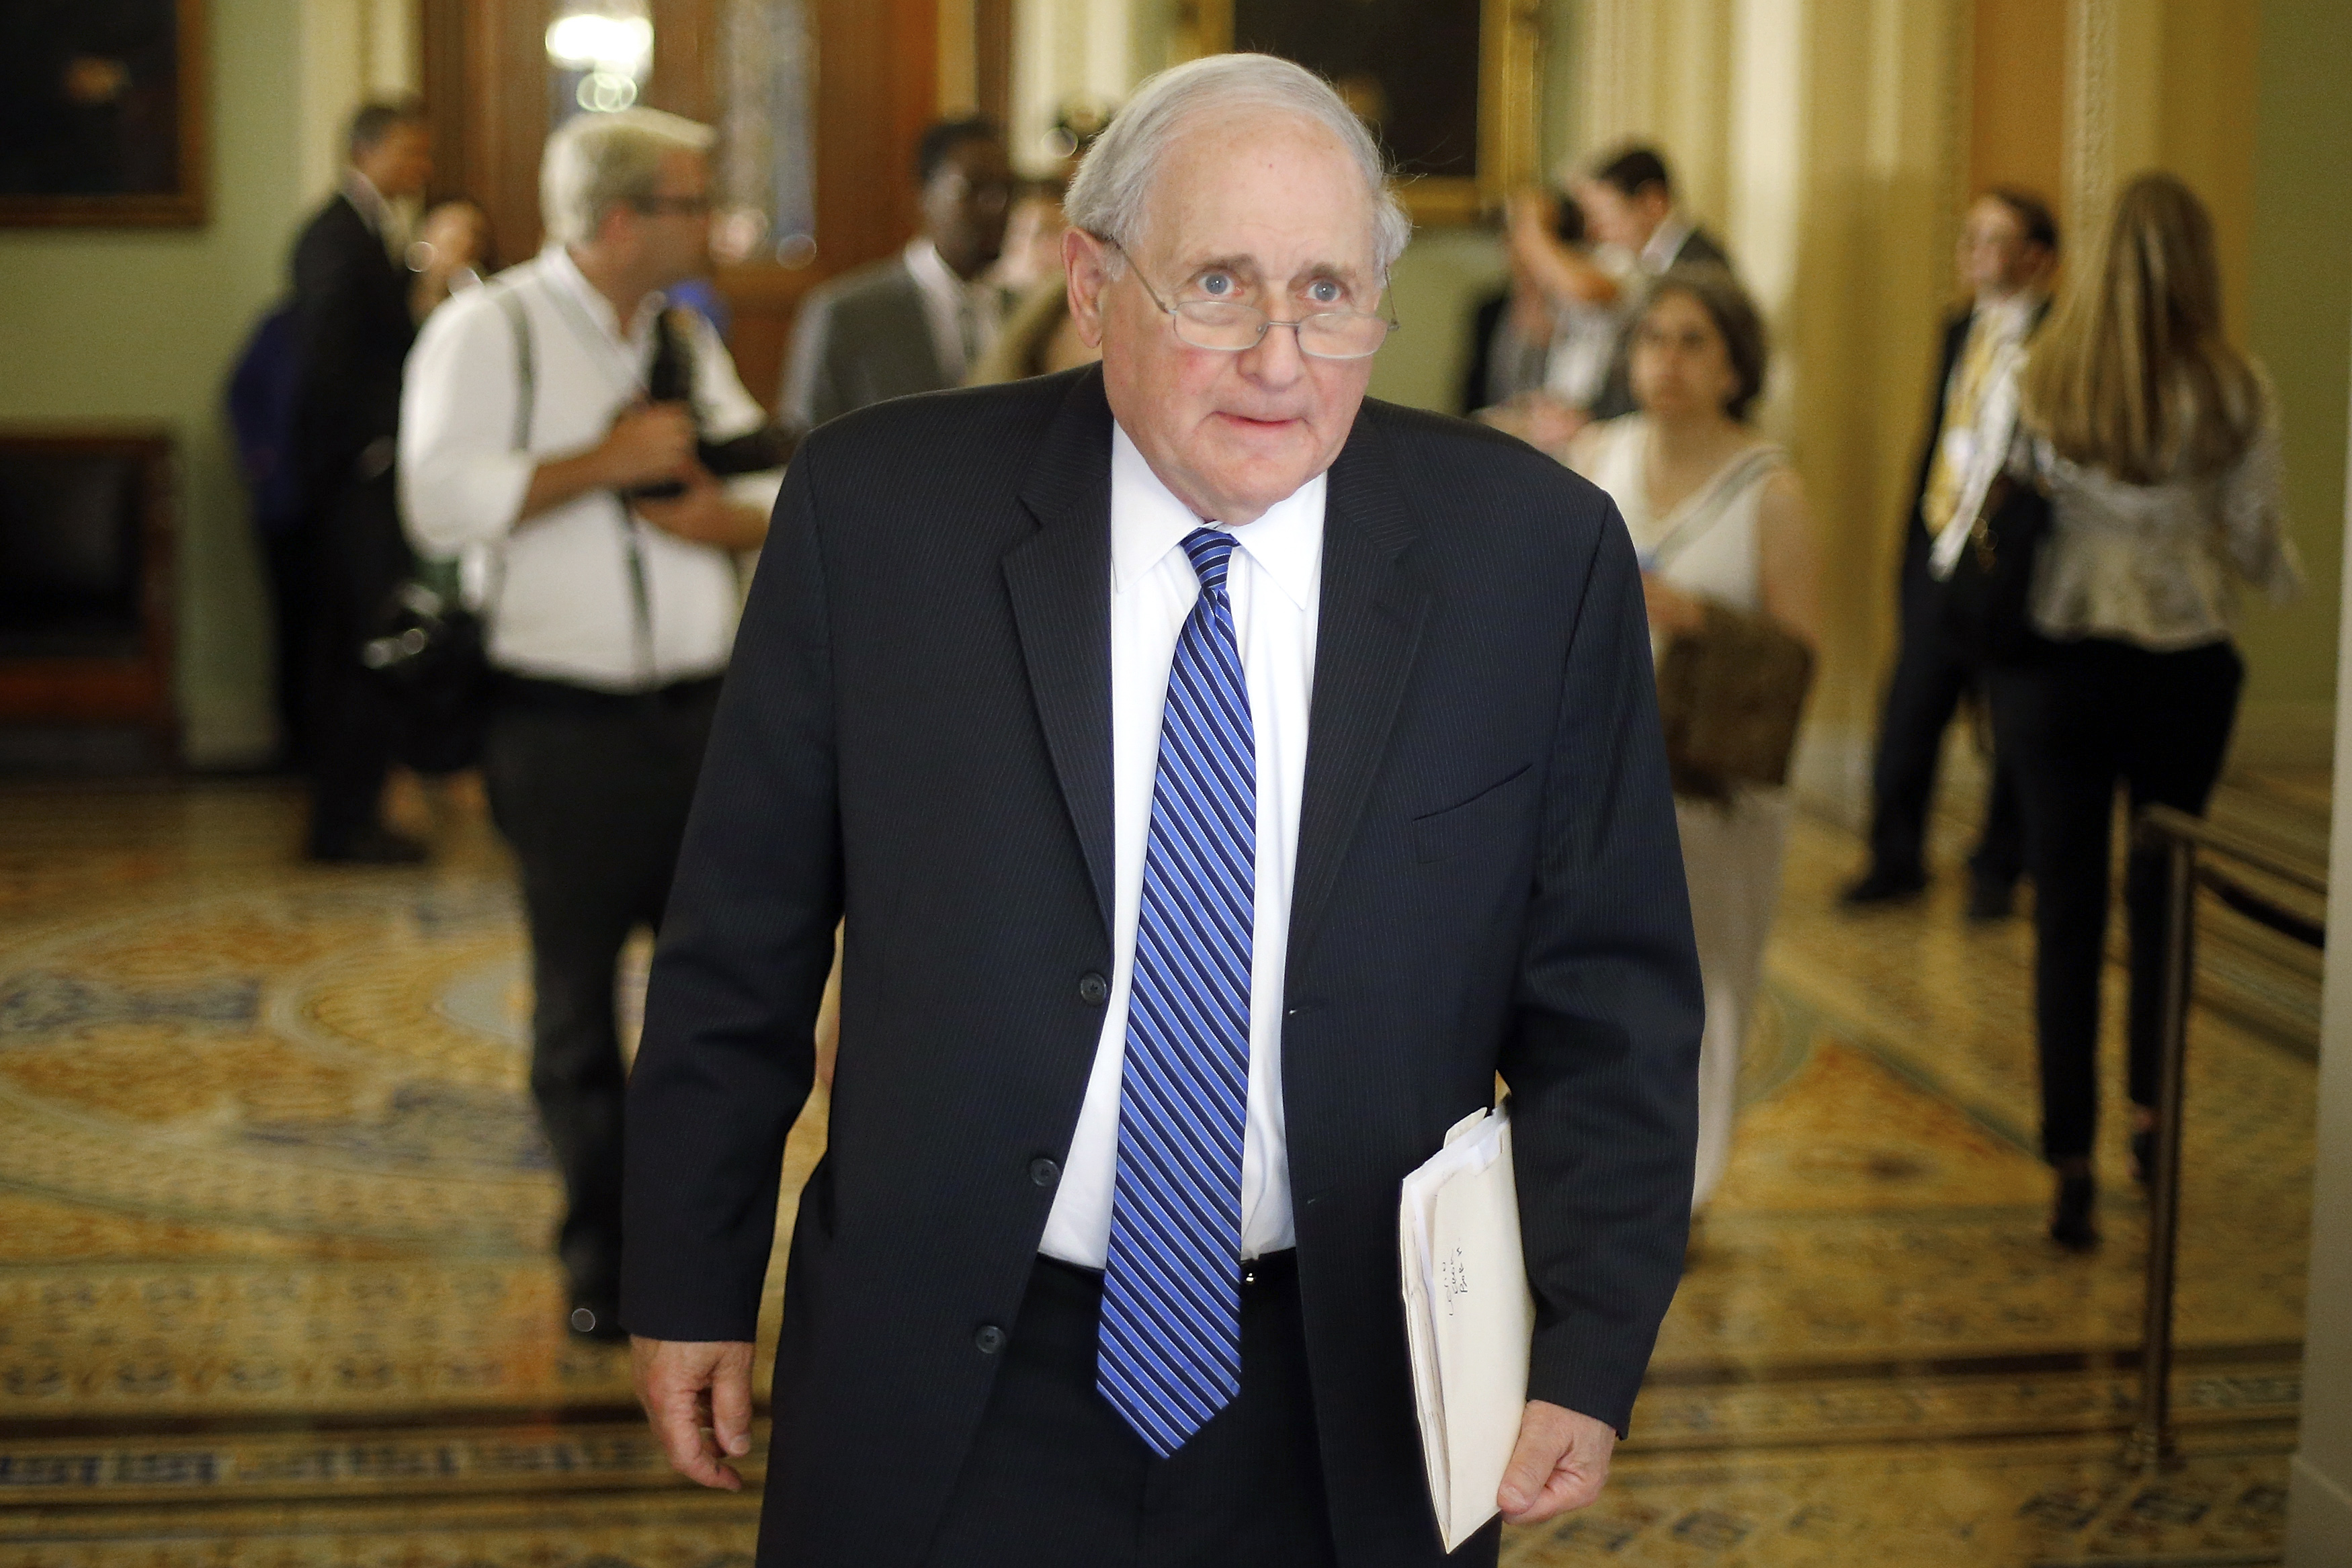 U.S. Senator Levin departs following the weekly Democratic caucus policy luncheon at the U.S. Capitol in Washington